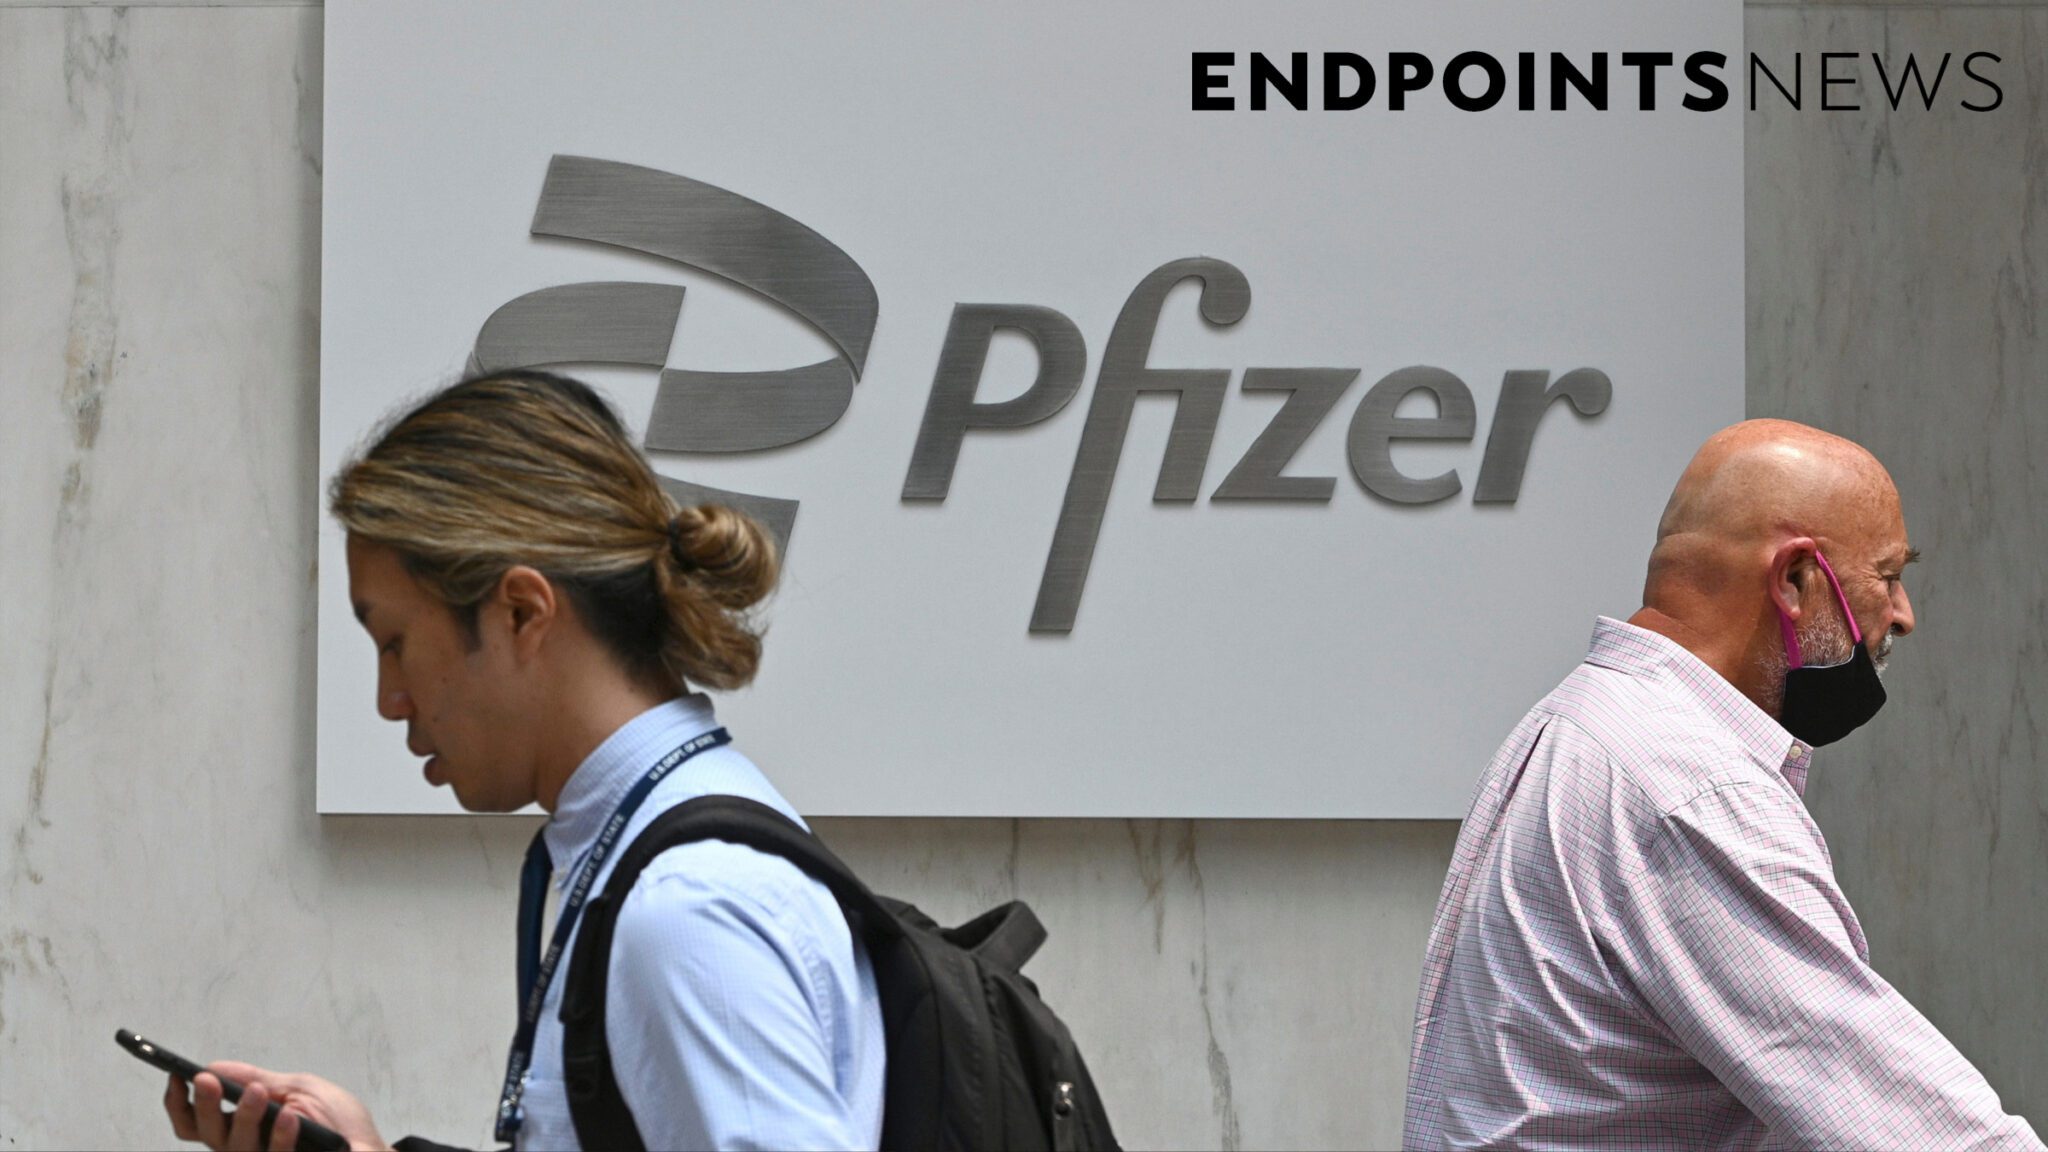 Pfizer's PARP inhibitor combo treatment passes primary endpoint — but details are slim